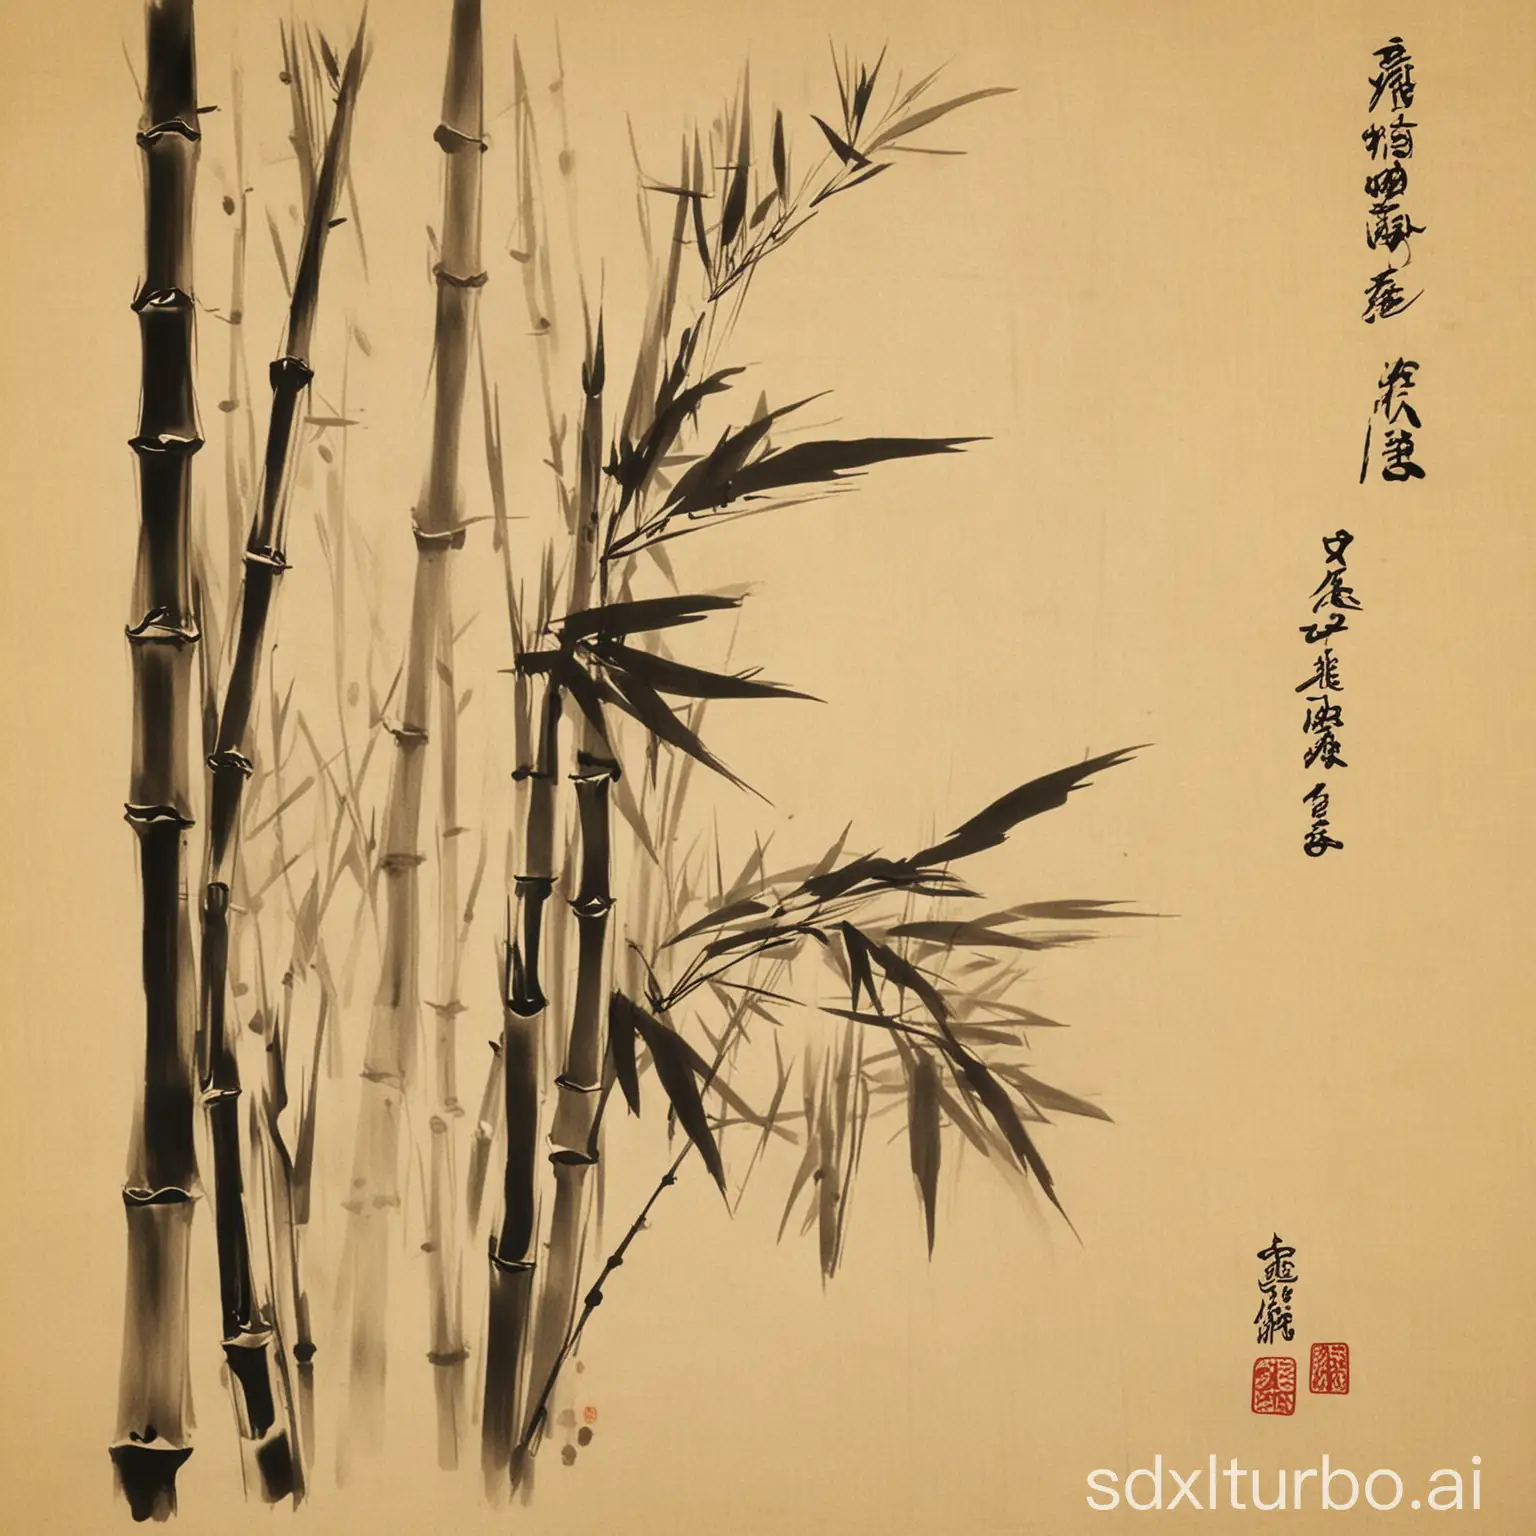 Bamboo-Hand-Drawing-in-Sumie-Style-Traditional-Japanese-Ink-Artwork